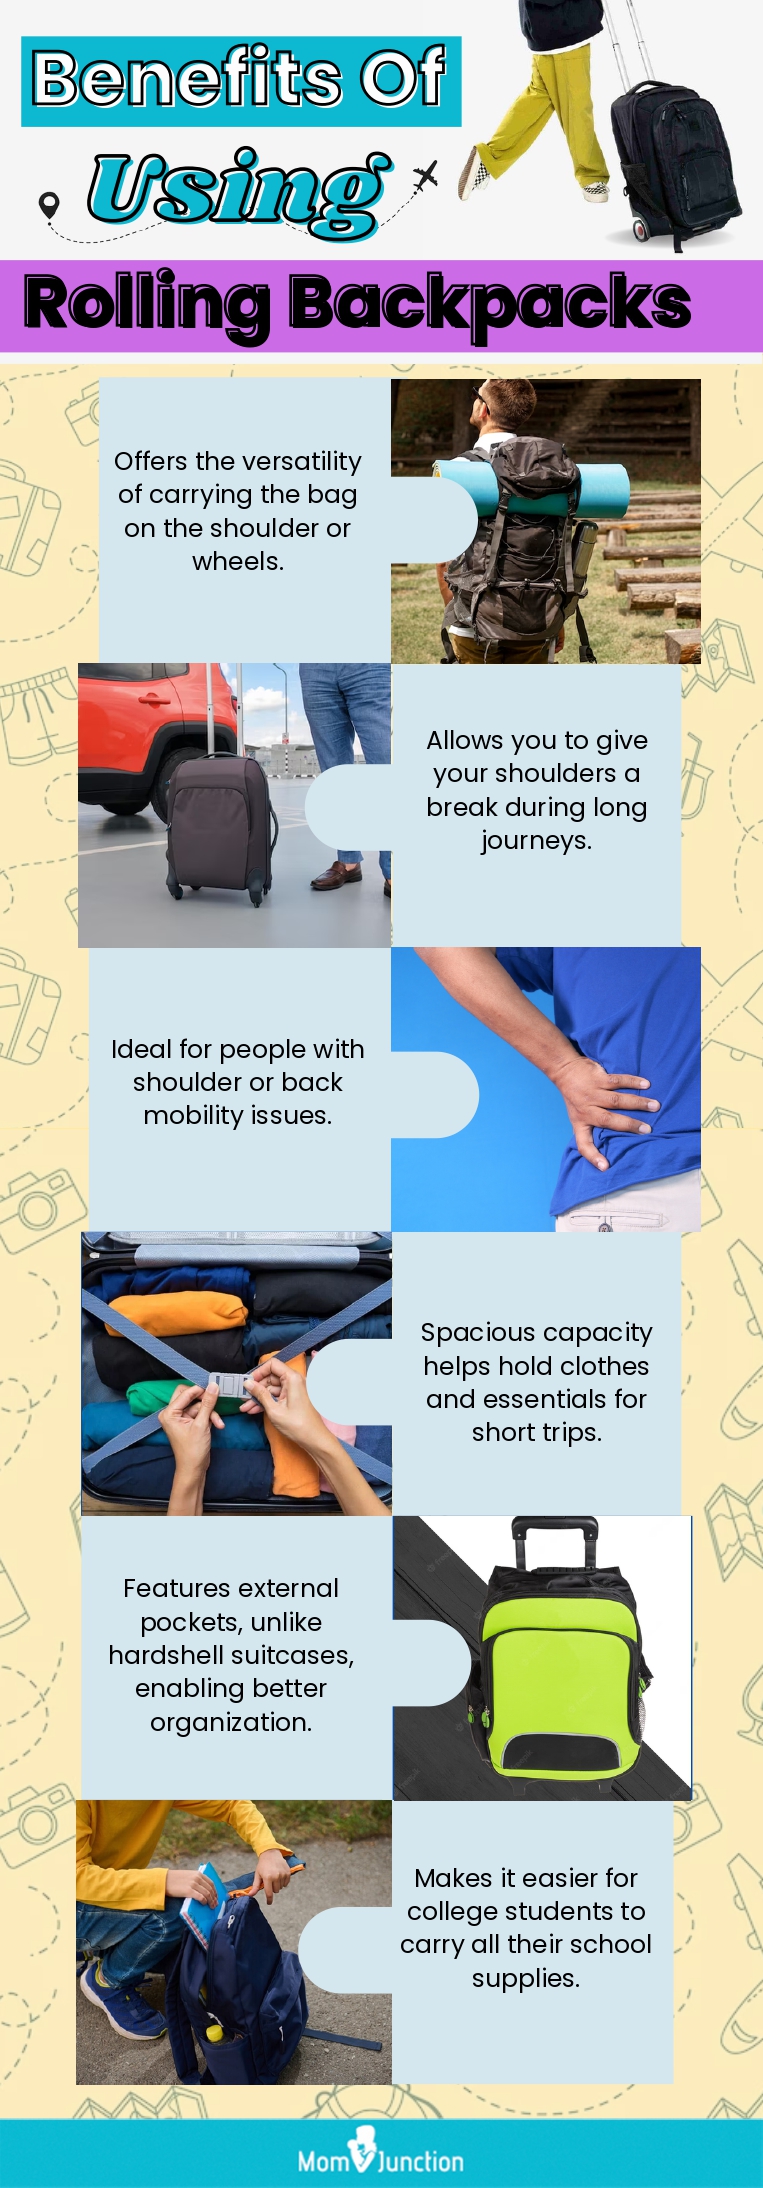 Benefits Of Using Rolling Backpacks (infographic)